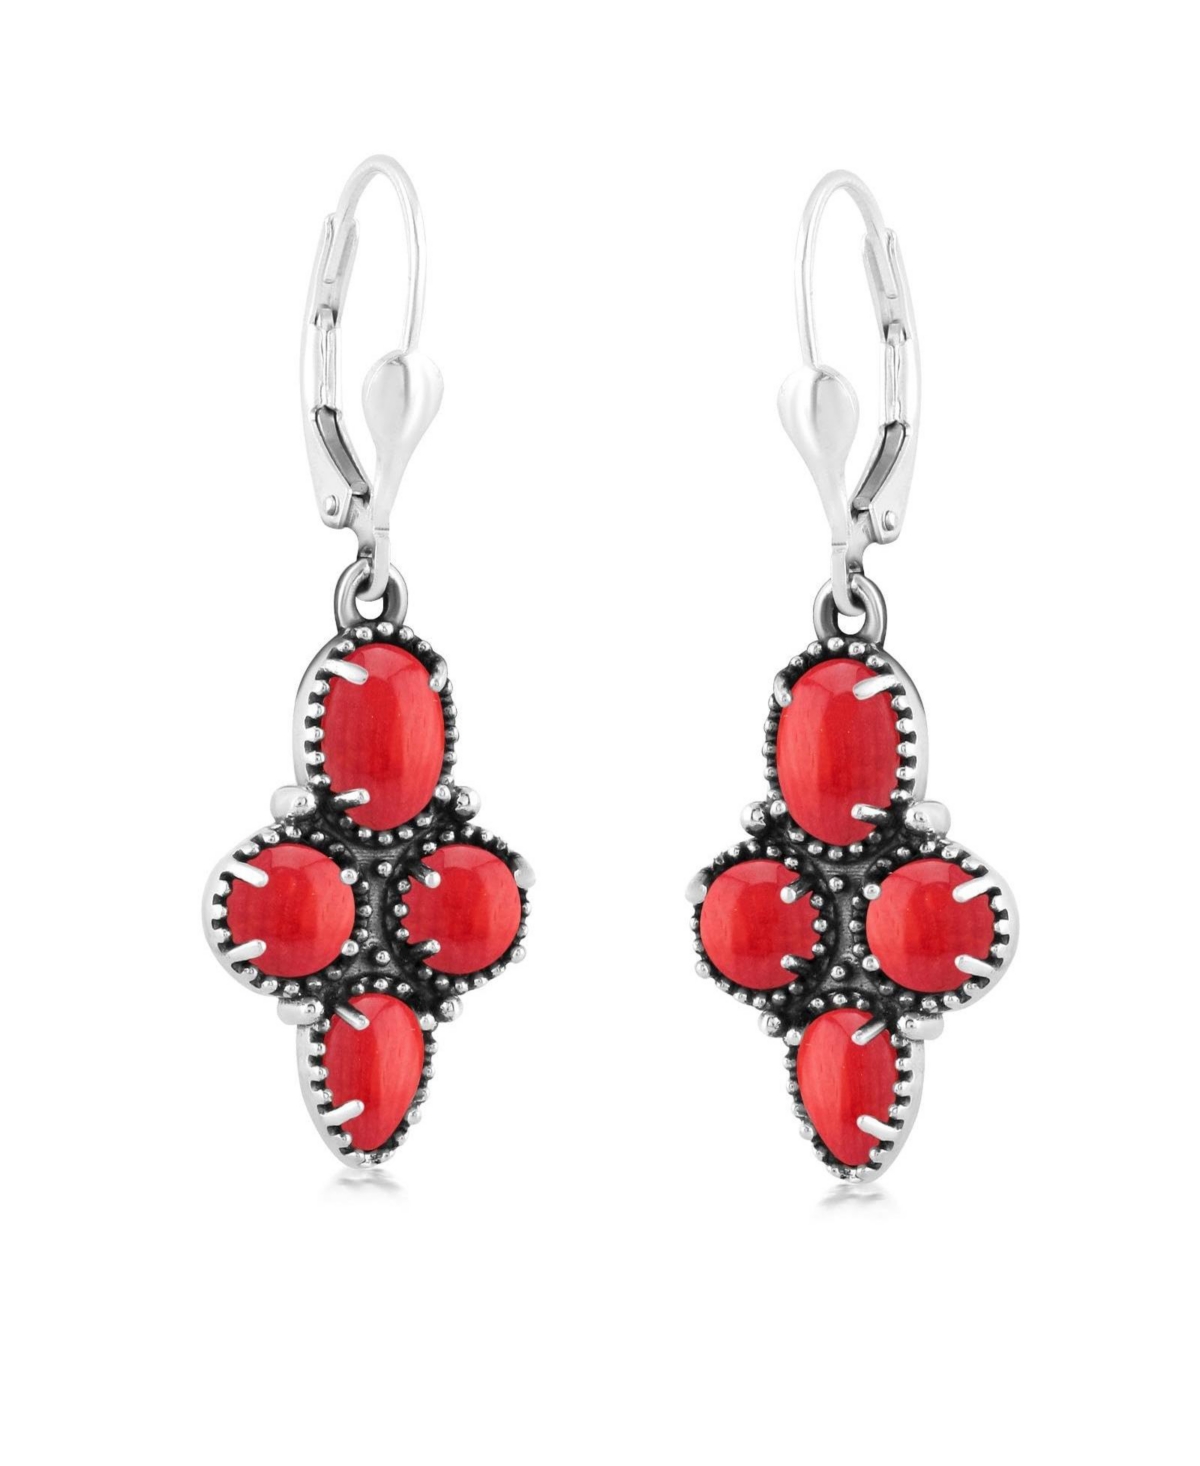 Sterling Silver and Genuine Gemstone Lever Back Earrings - Red coral